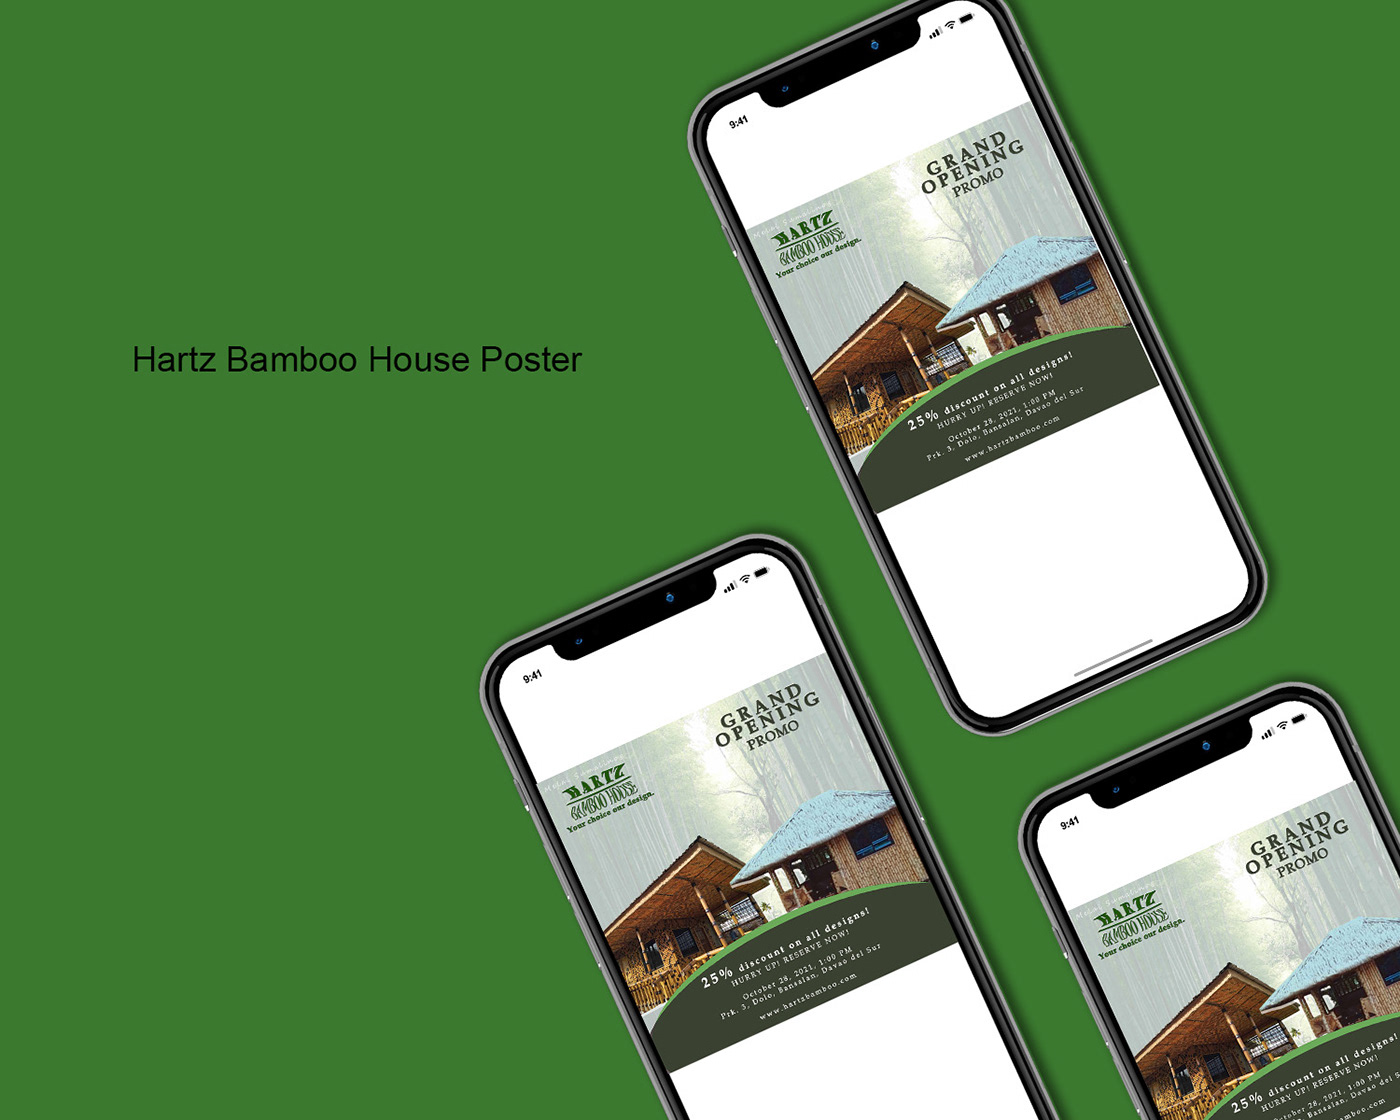 Hartz Bamboo House Grand Opening Promo Poster